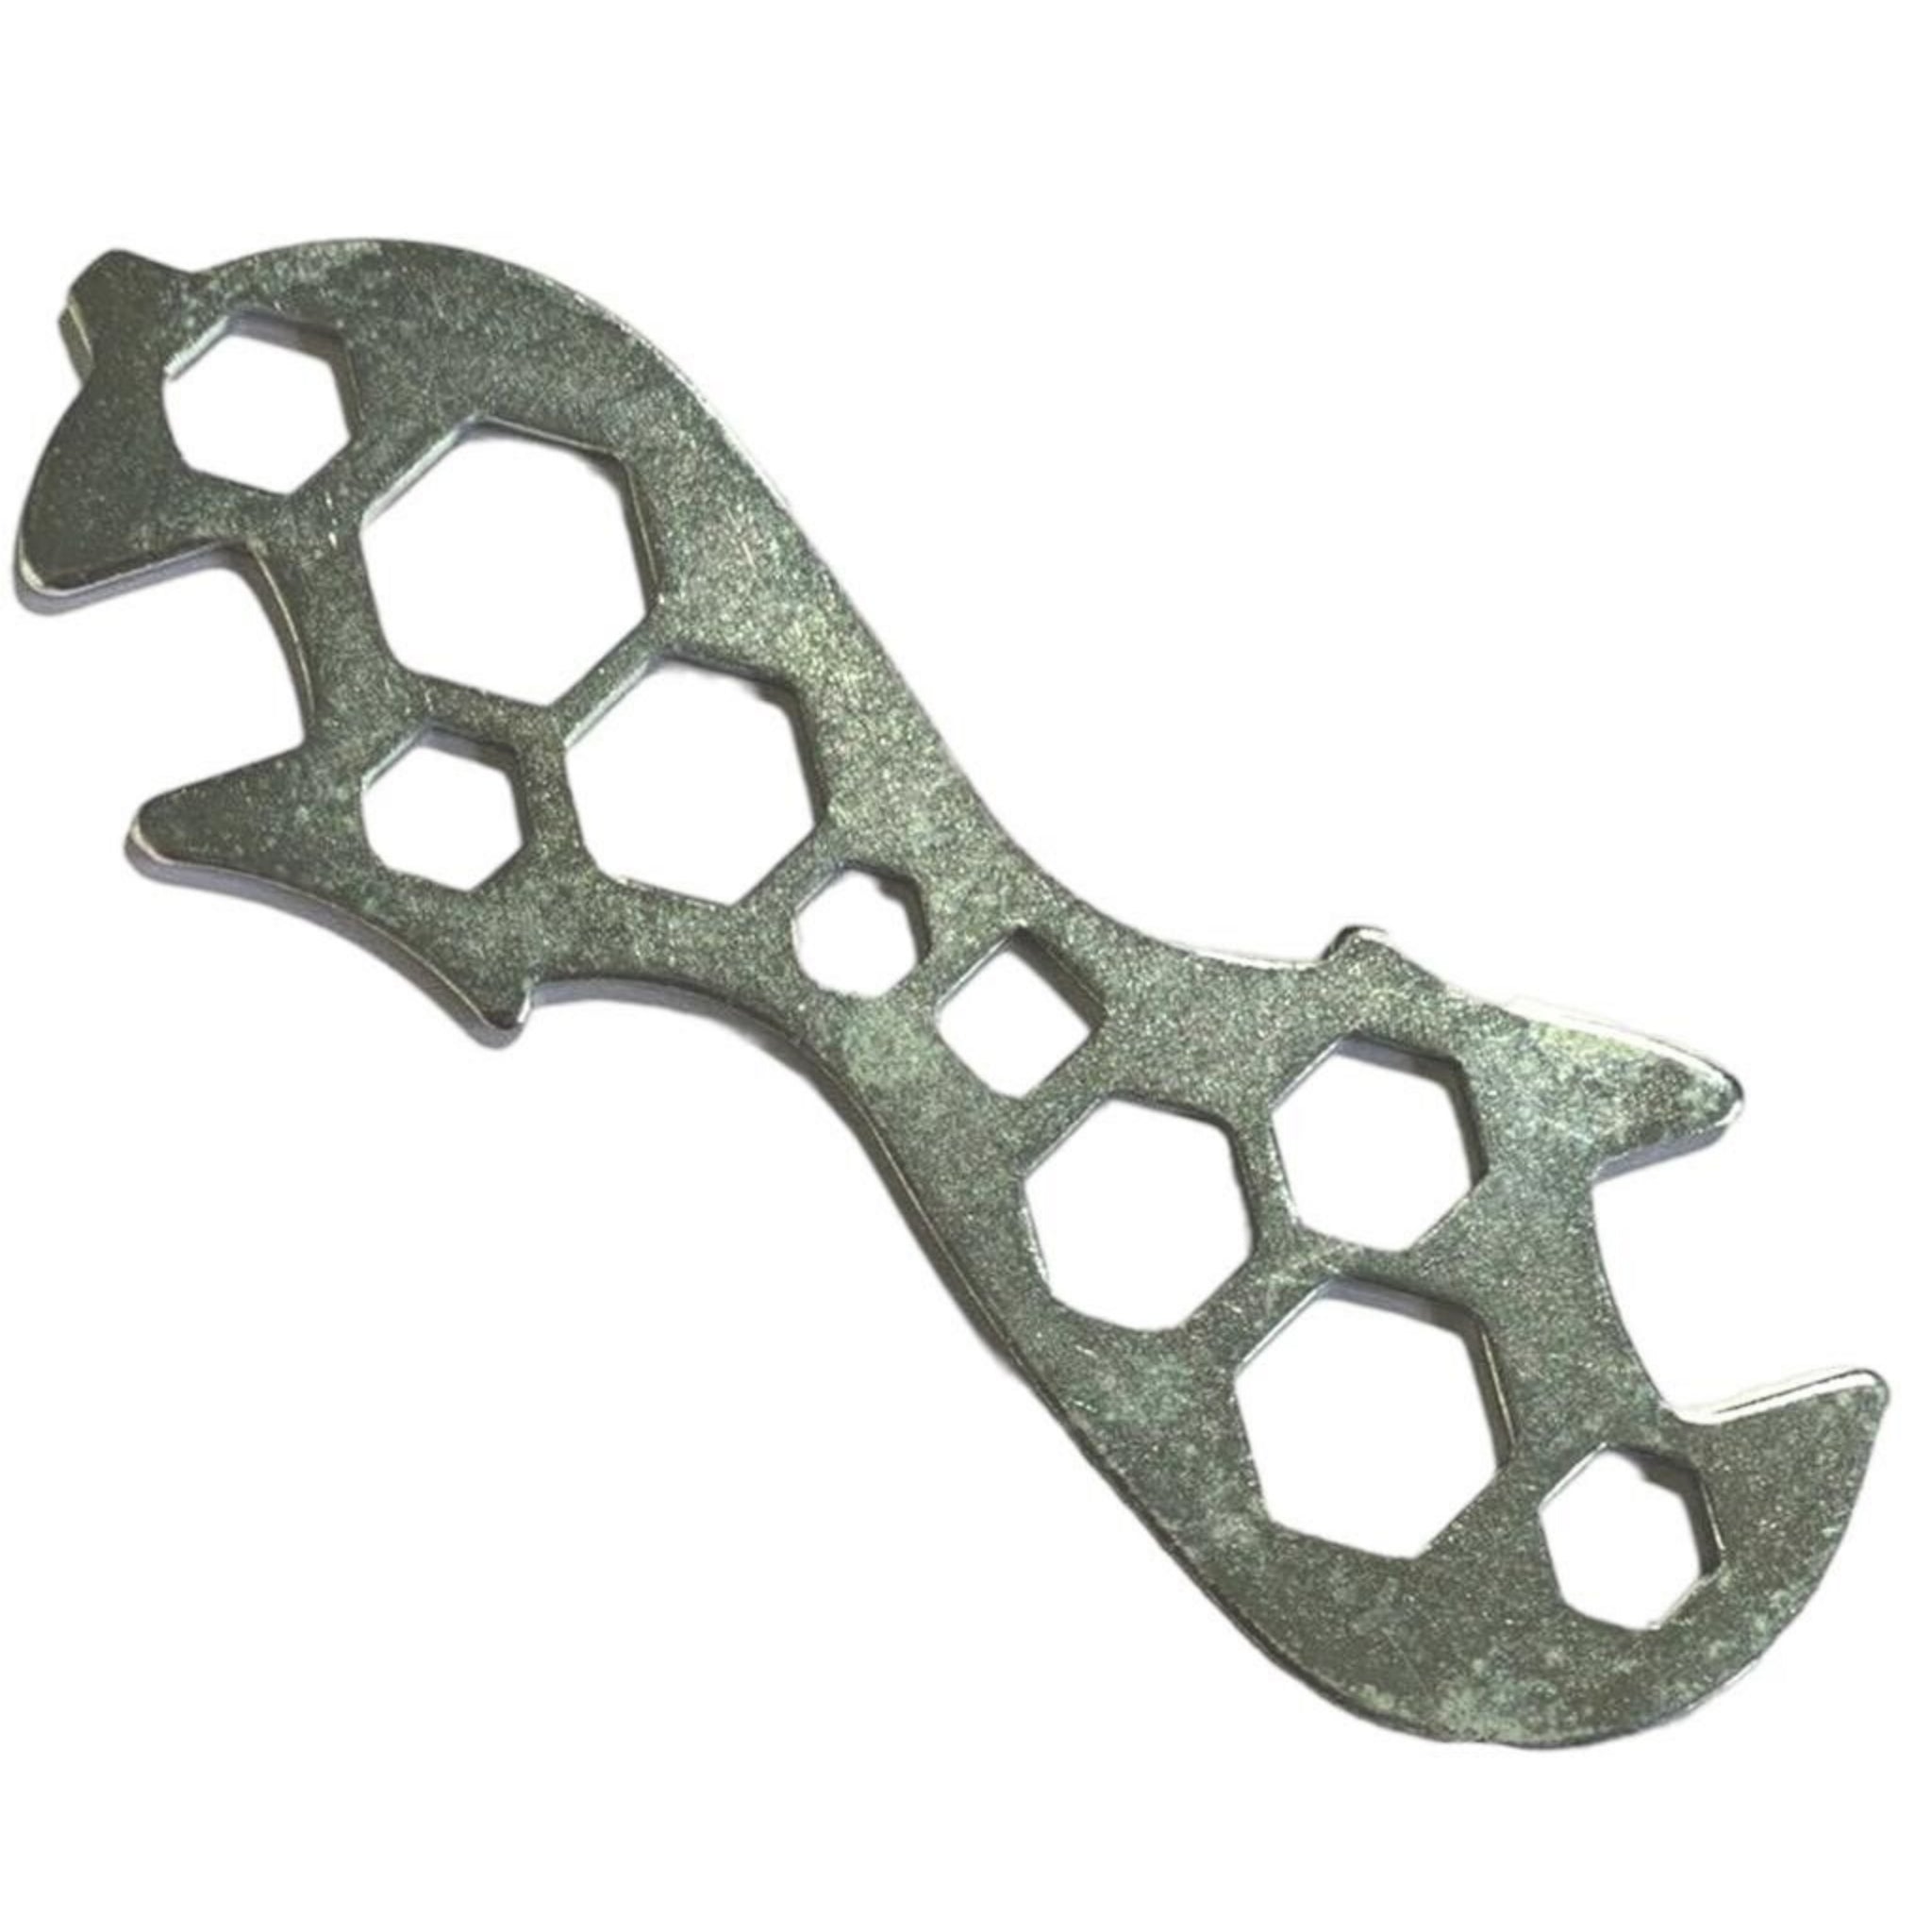 Beclen Harp Multi Purpose/Function Steel Spanner Wrench Tool-Perfect Tool To Repair/Fix Bike And Cycle